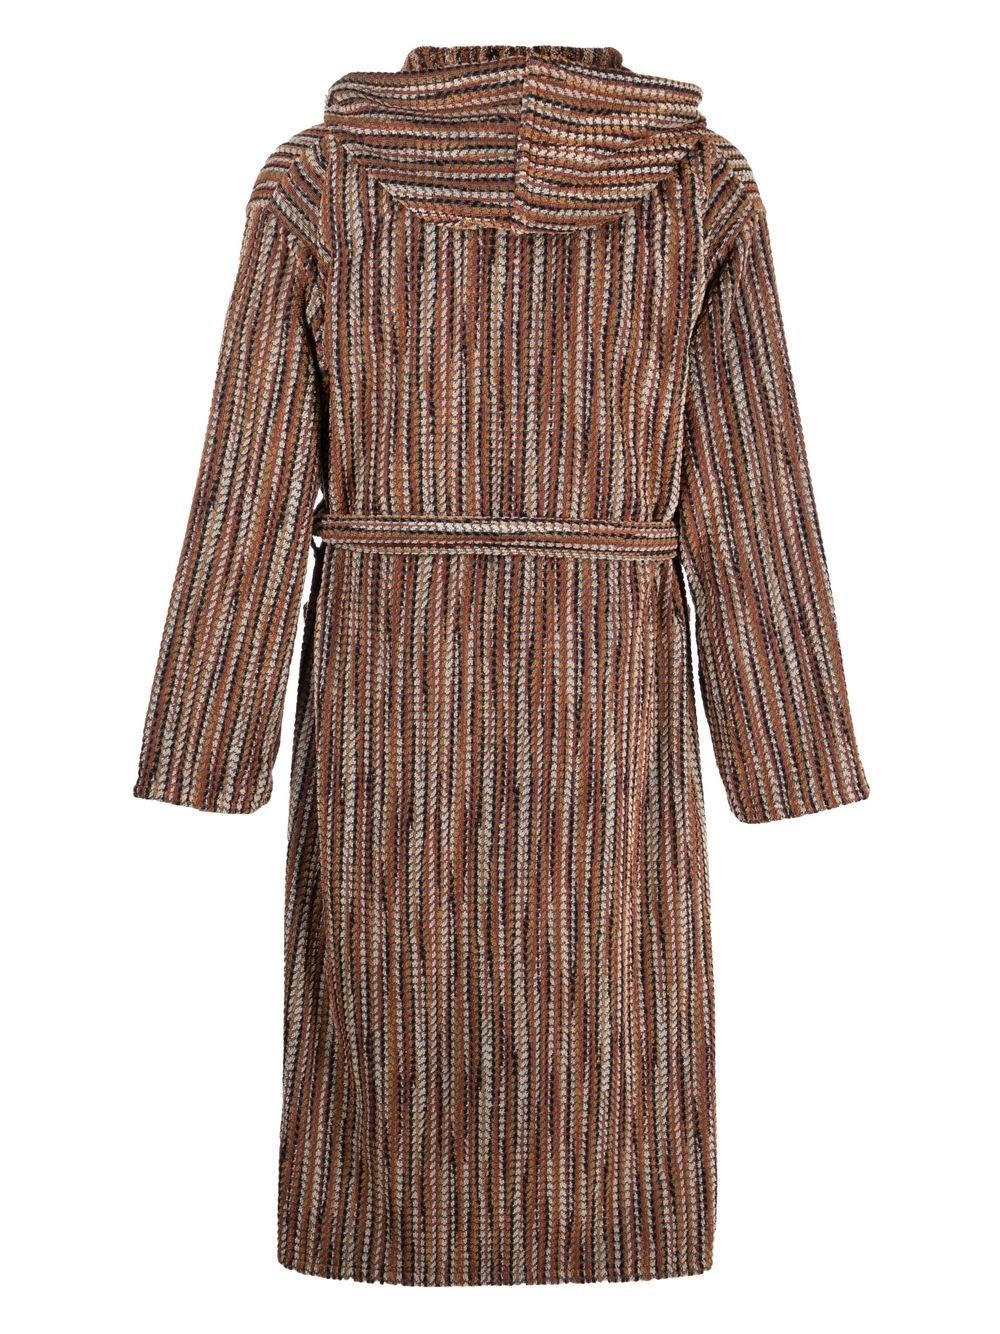 Billy patterned towelling robe - 2